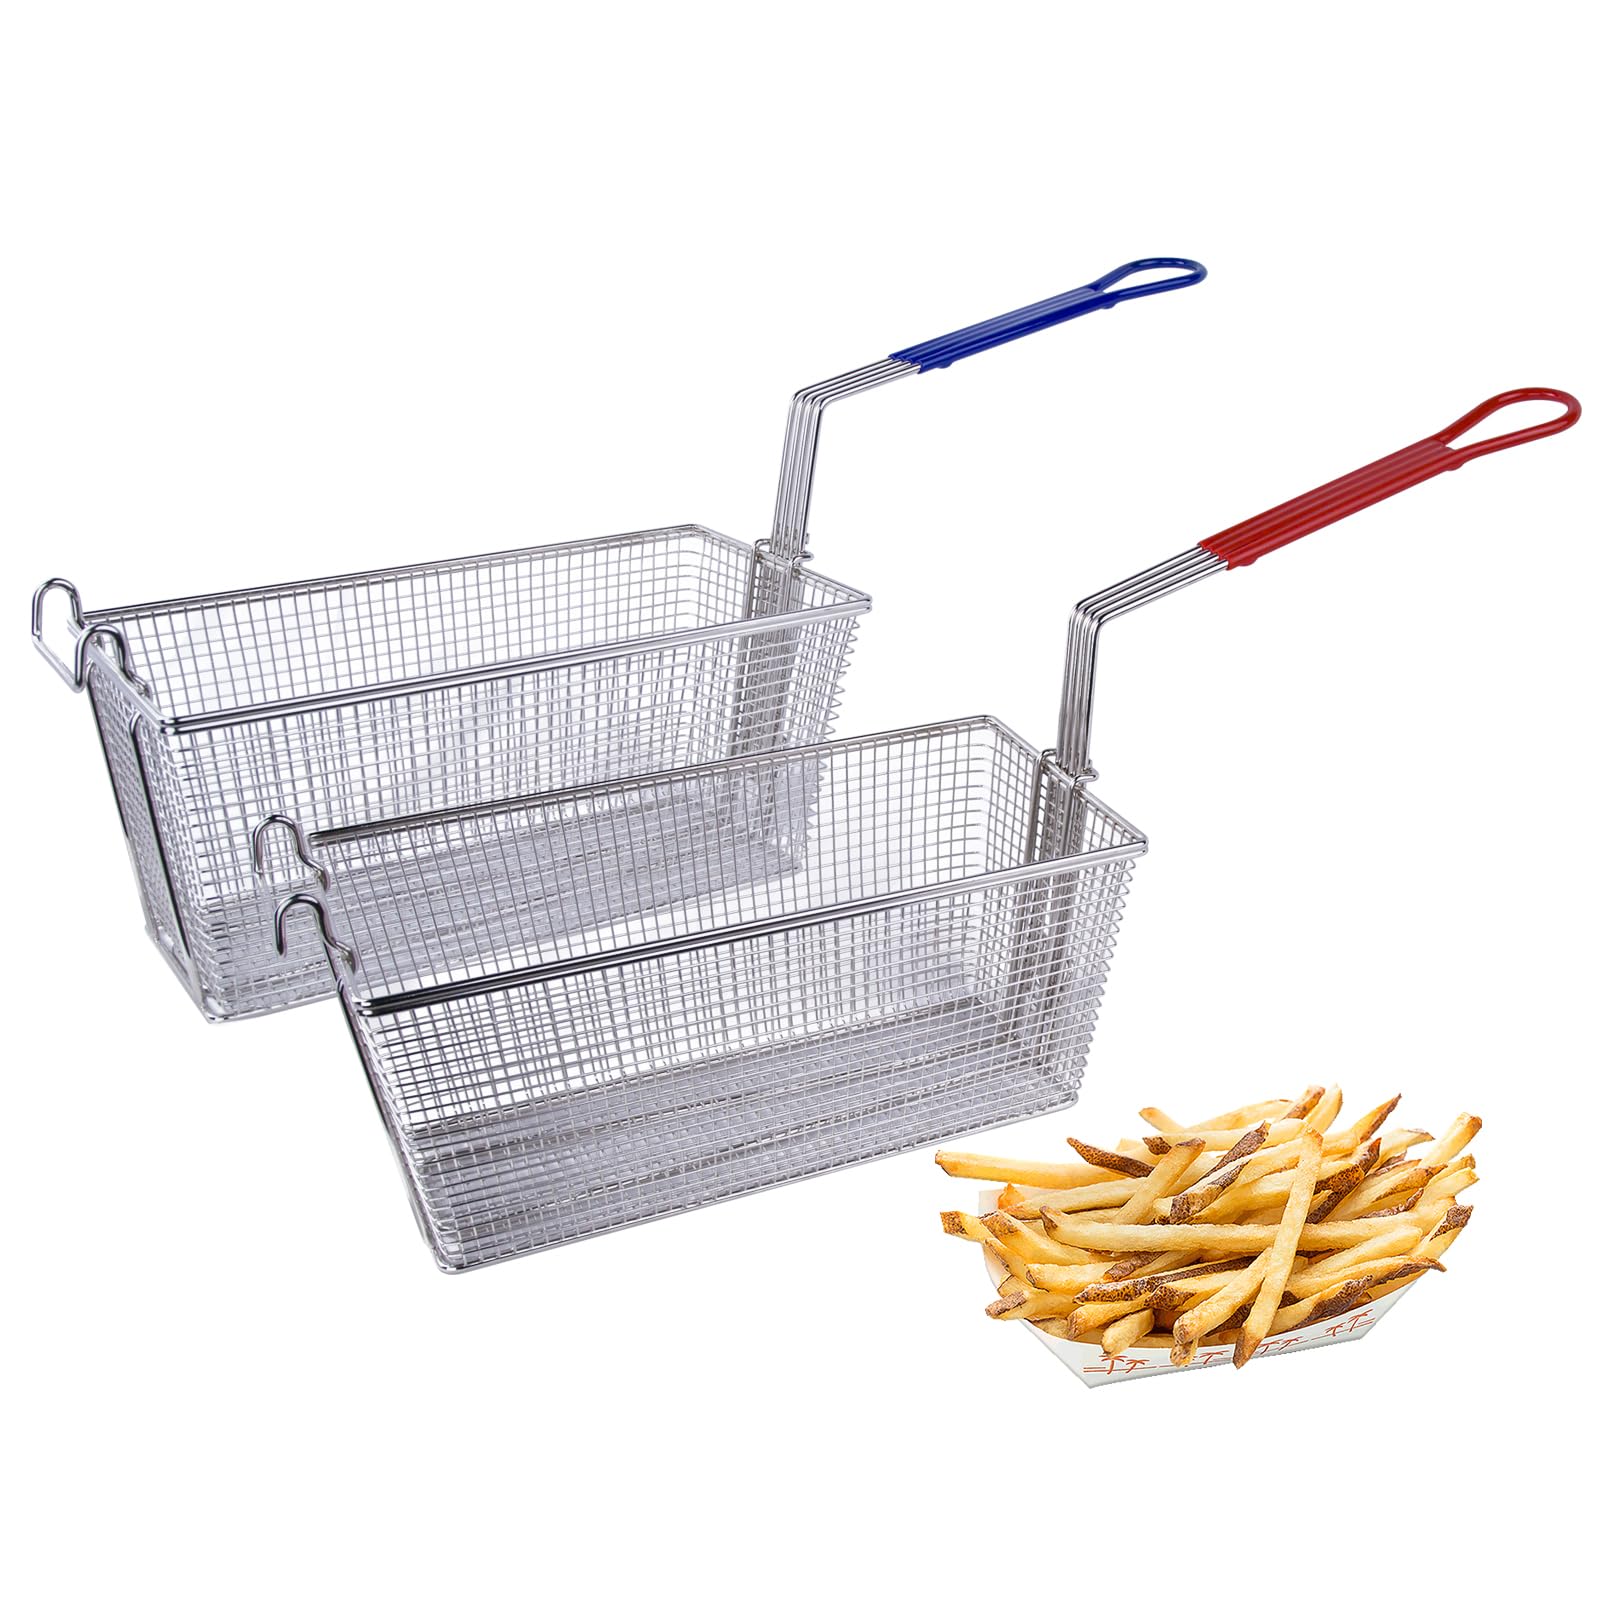 EASYROSE 4Pcs Commercial Deep Fryer Basket with Non-slip Handle, 13¼" x 6½" x 6" Nickel Plated French Fries Basket for Restaurant Kitchen